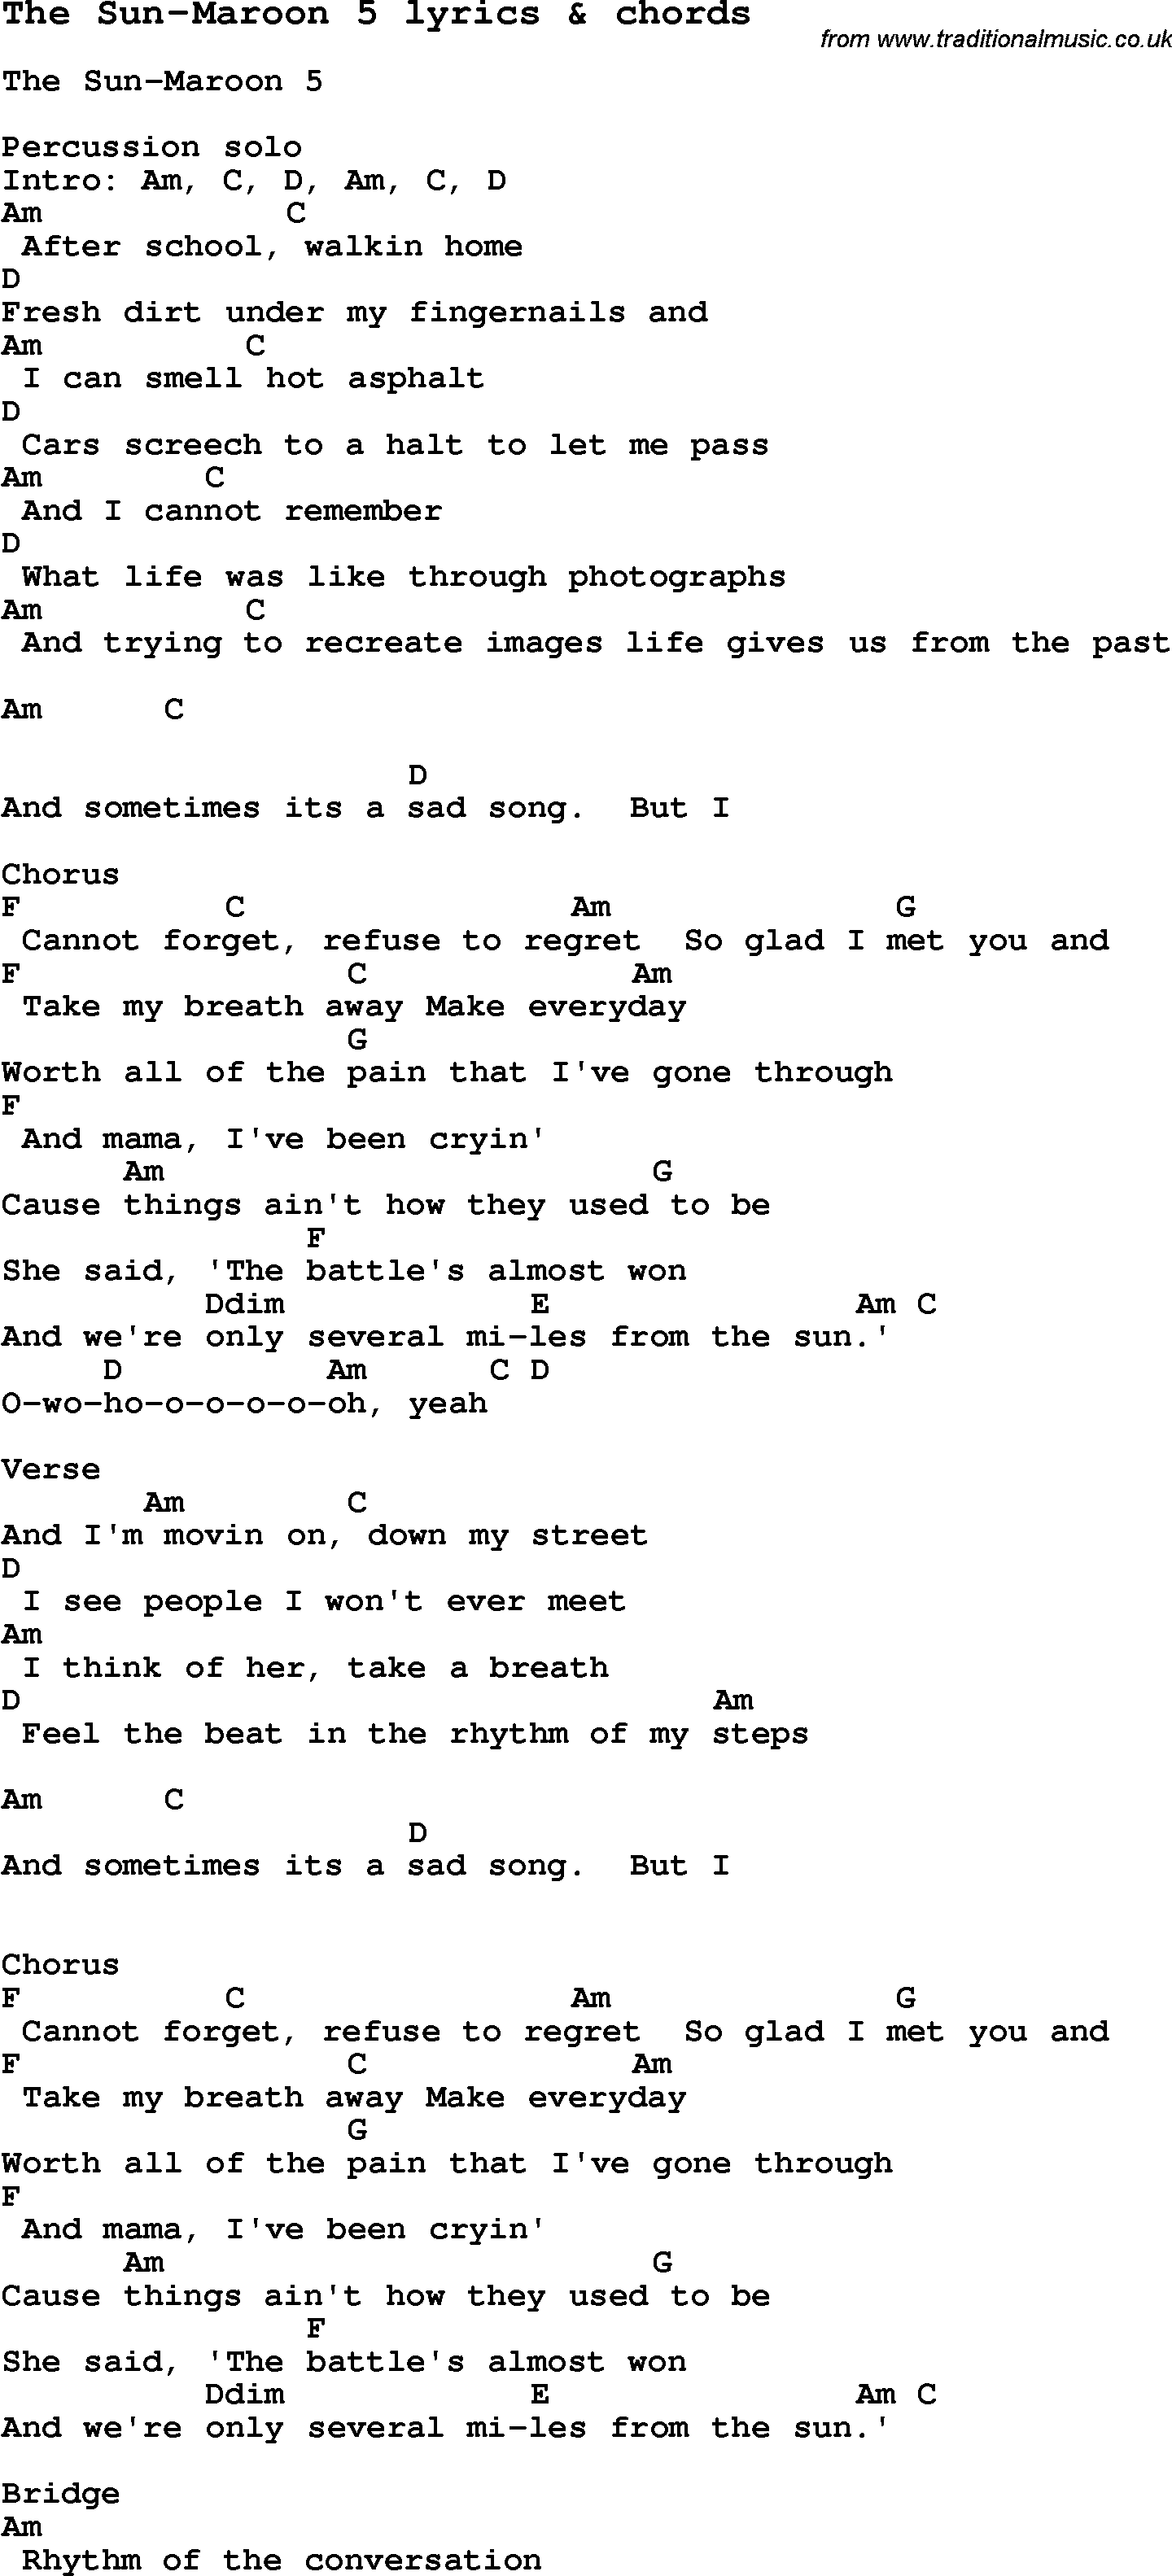 Love Song Lyrics for: The Sun-Maroon 5 with chords for Ukulele, Guitar Banjo etc.